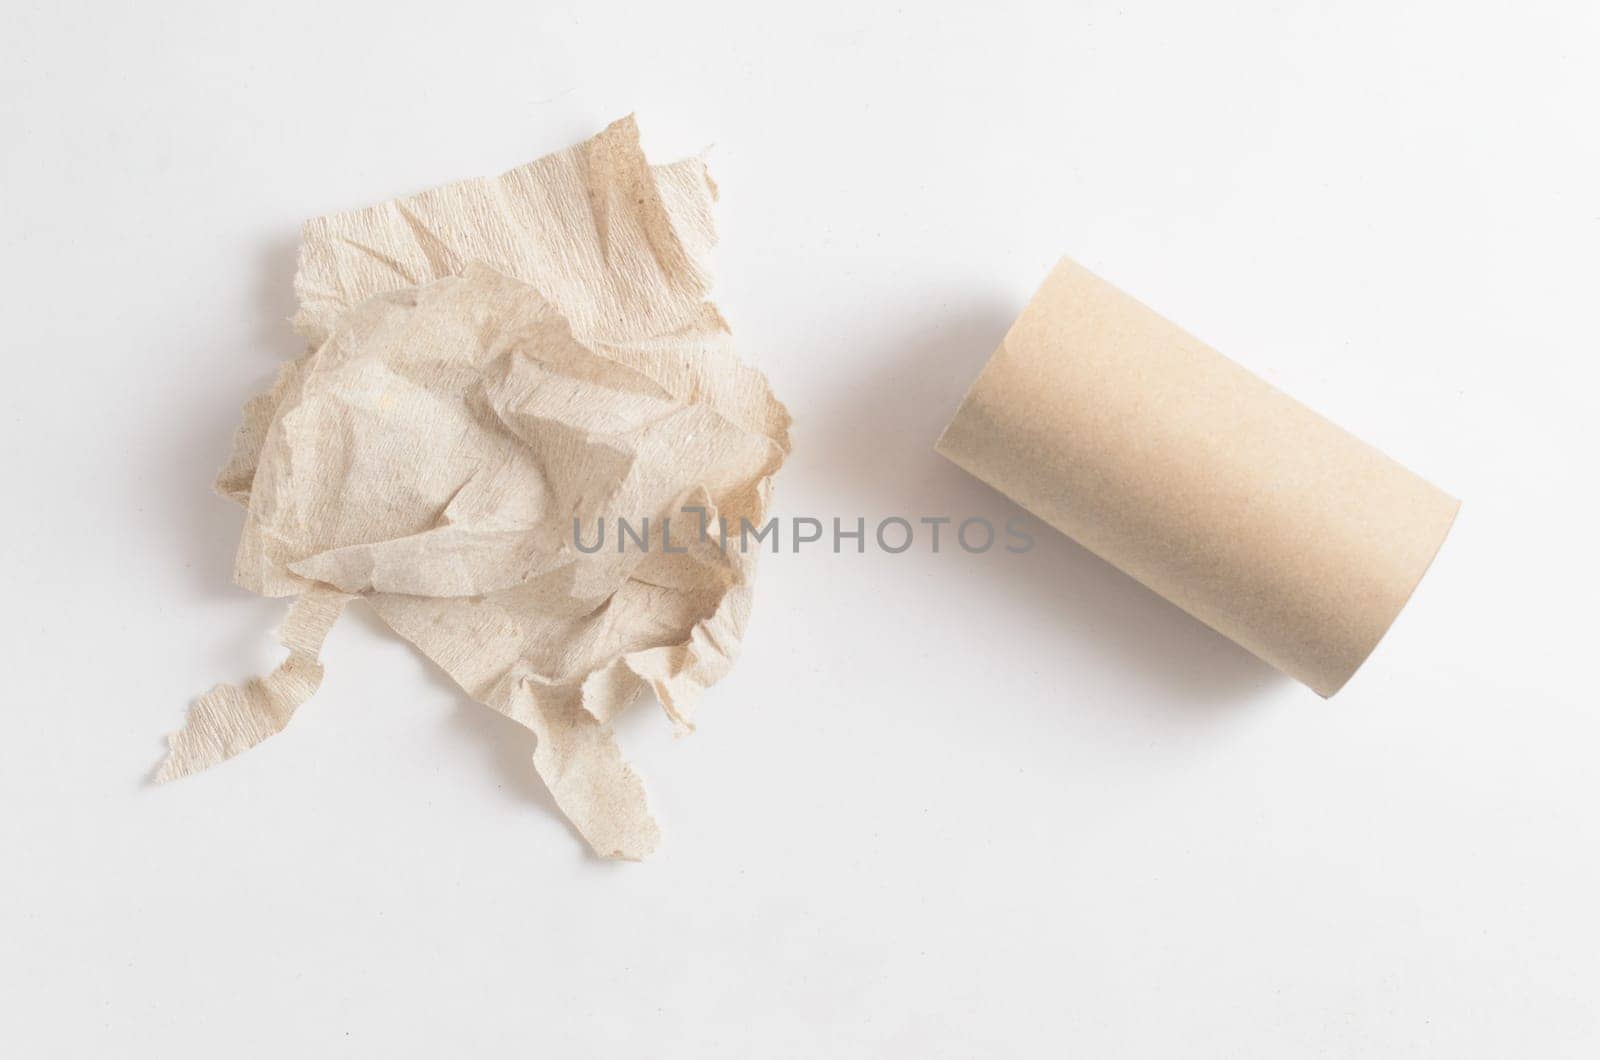 Crumpled toilet paper and empty toilet paper roll on white background by andre_dechapelle